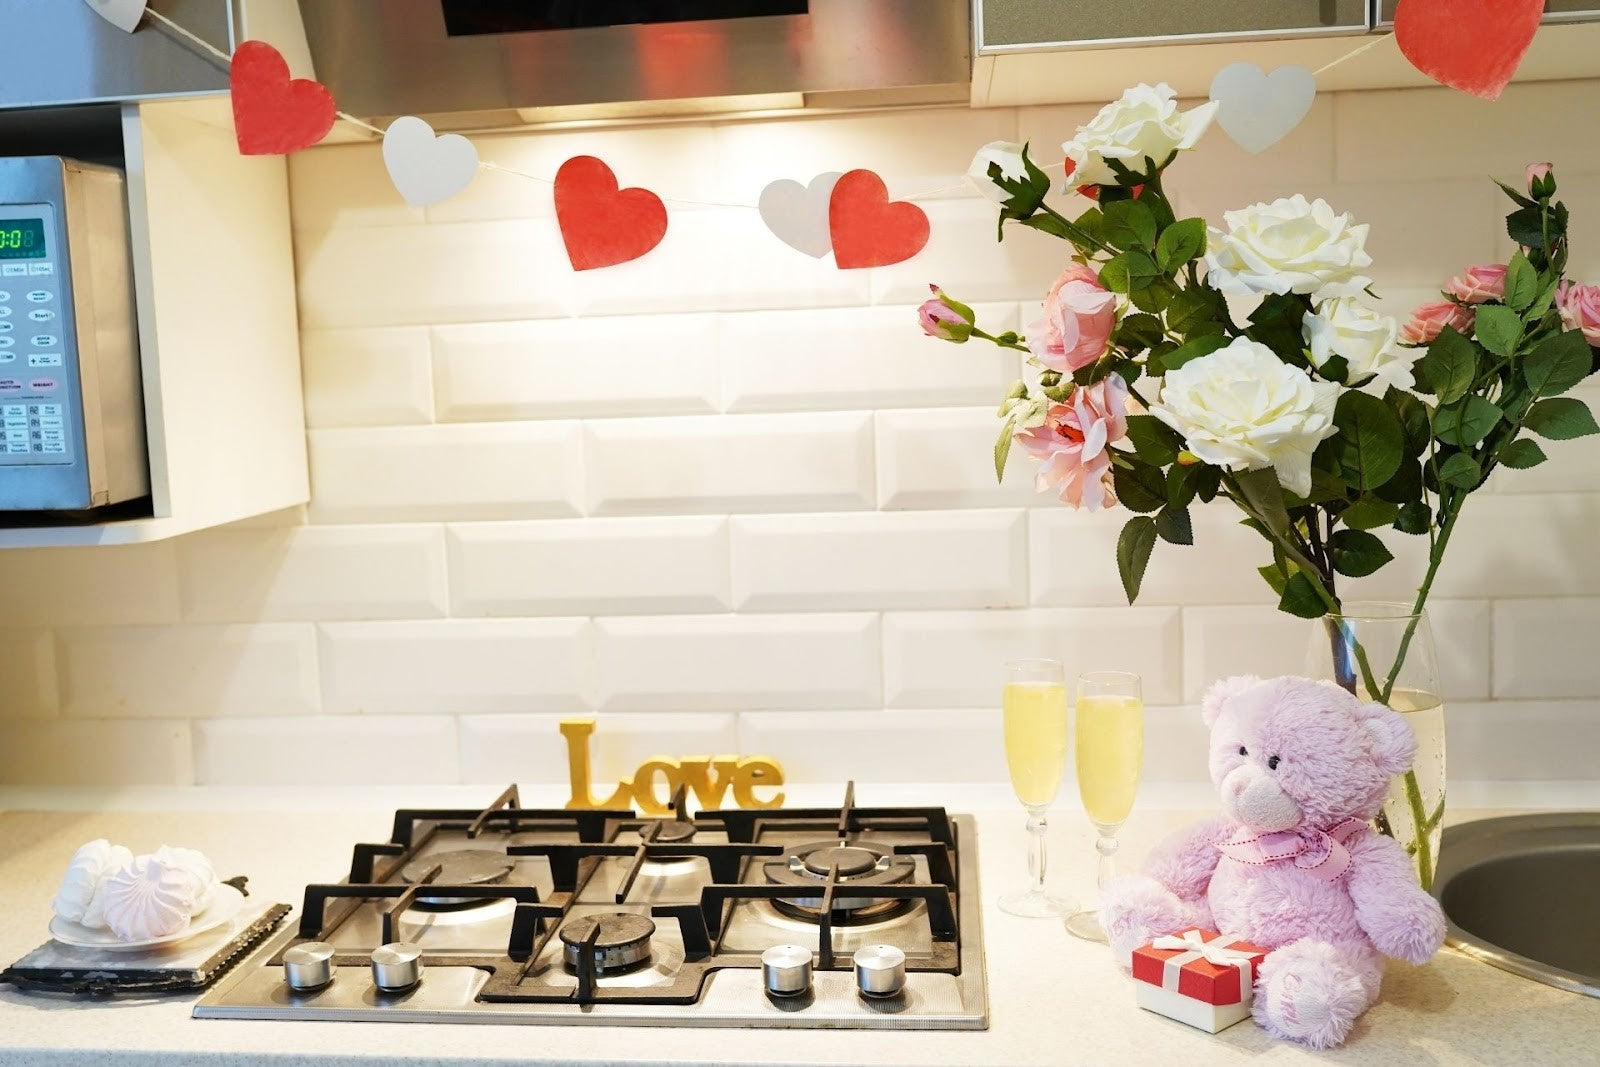 Paper hearts, flowers, a teddy bear and two glasses of champagne on a kitchen counter next to a stovetop